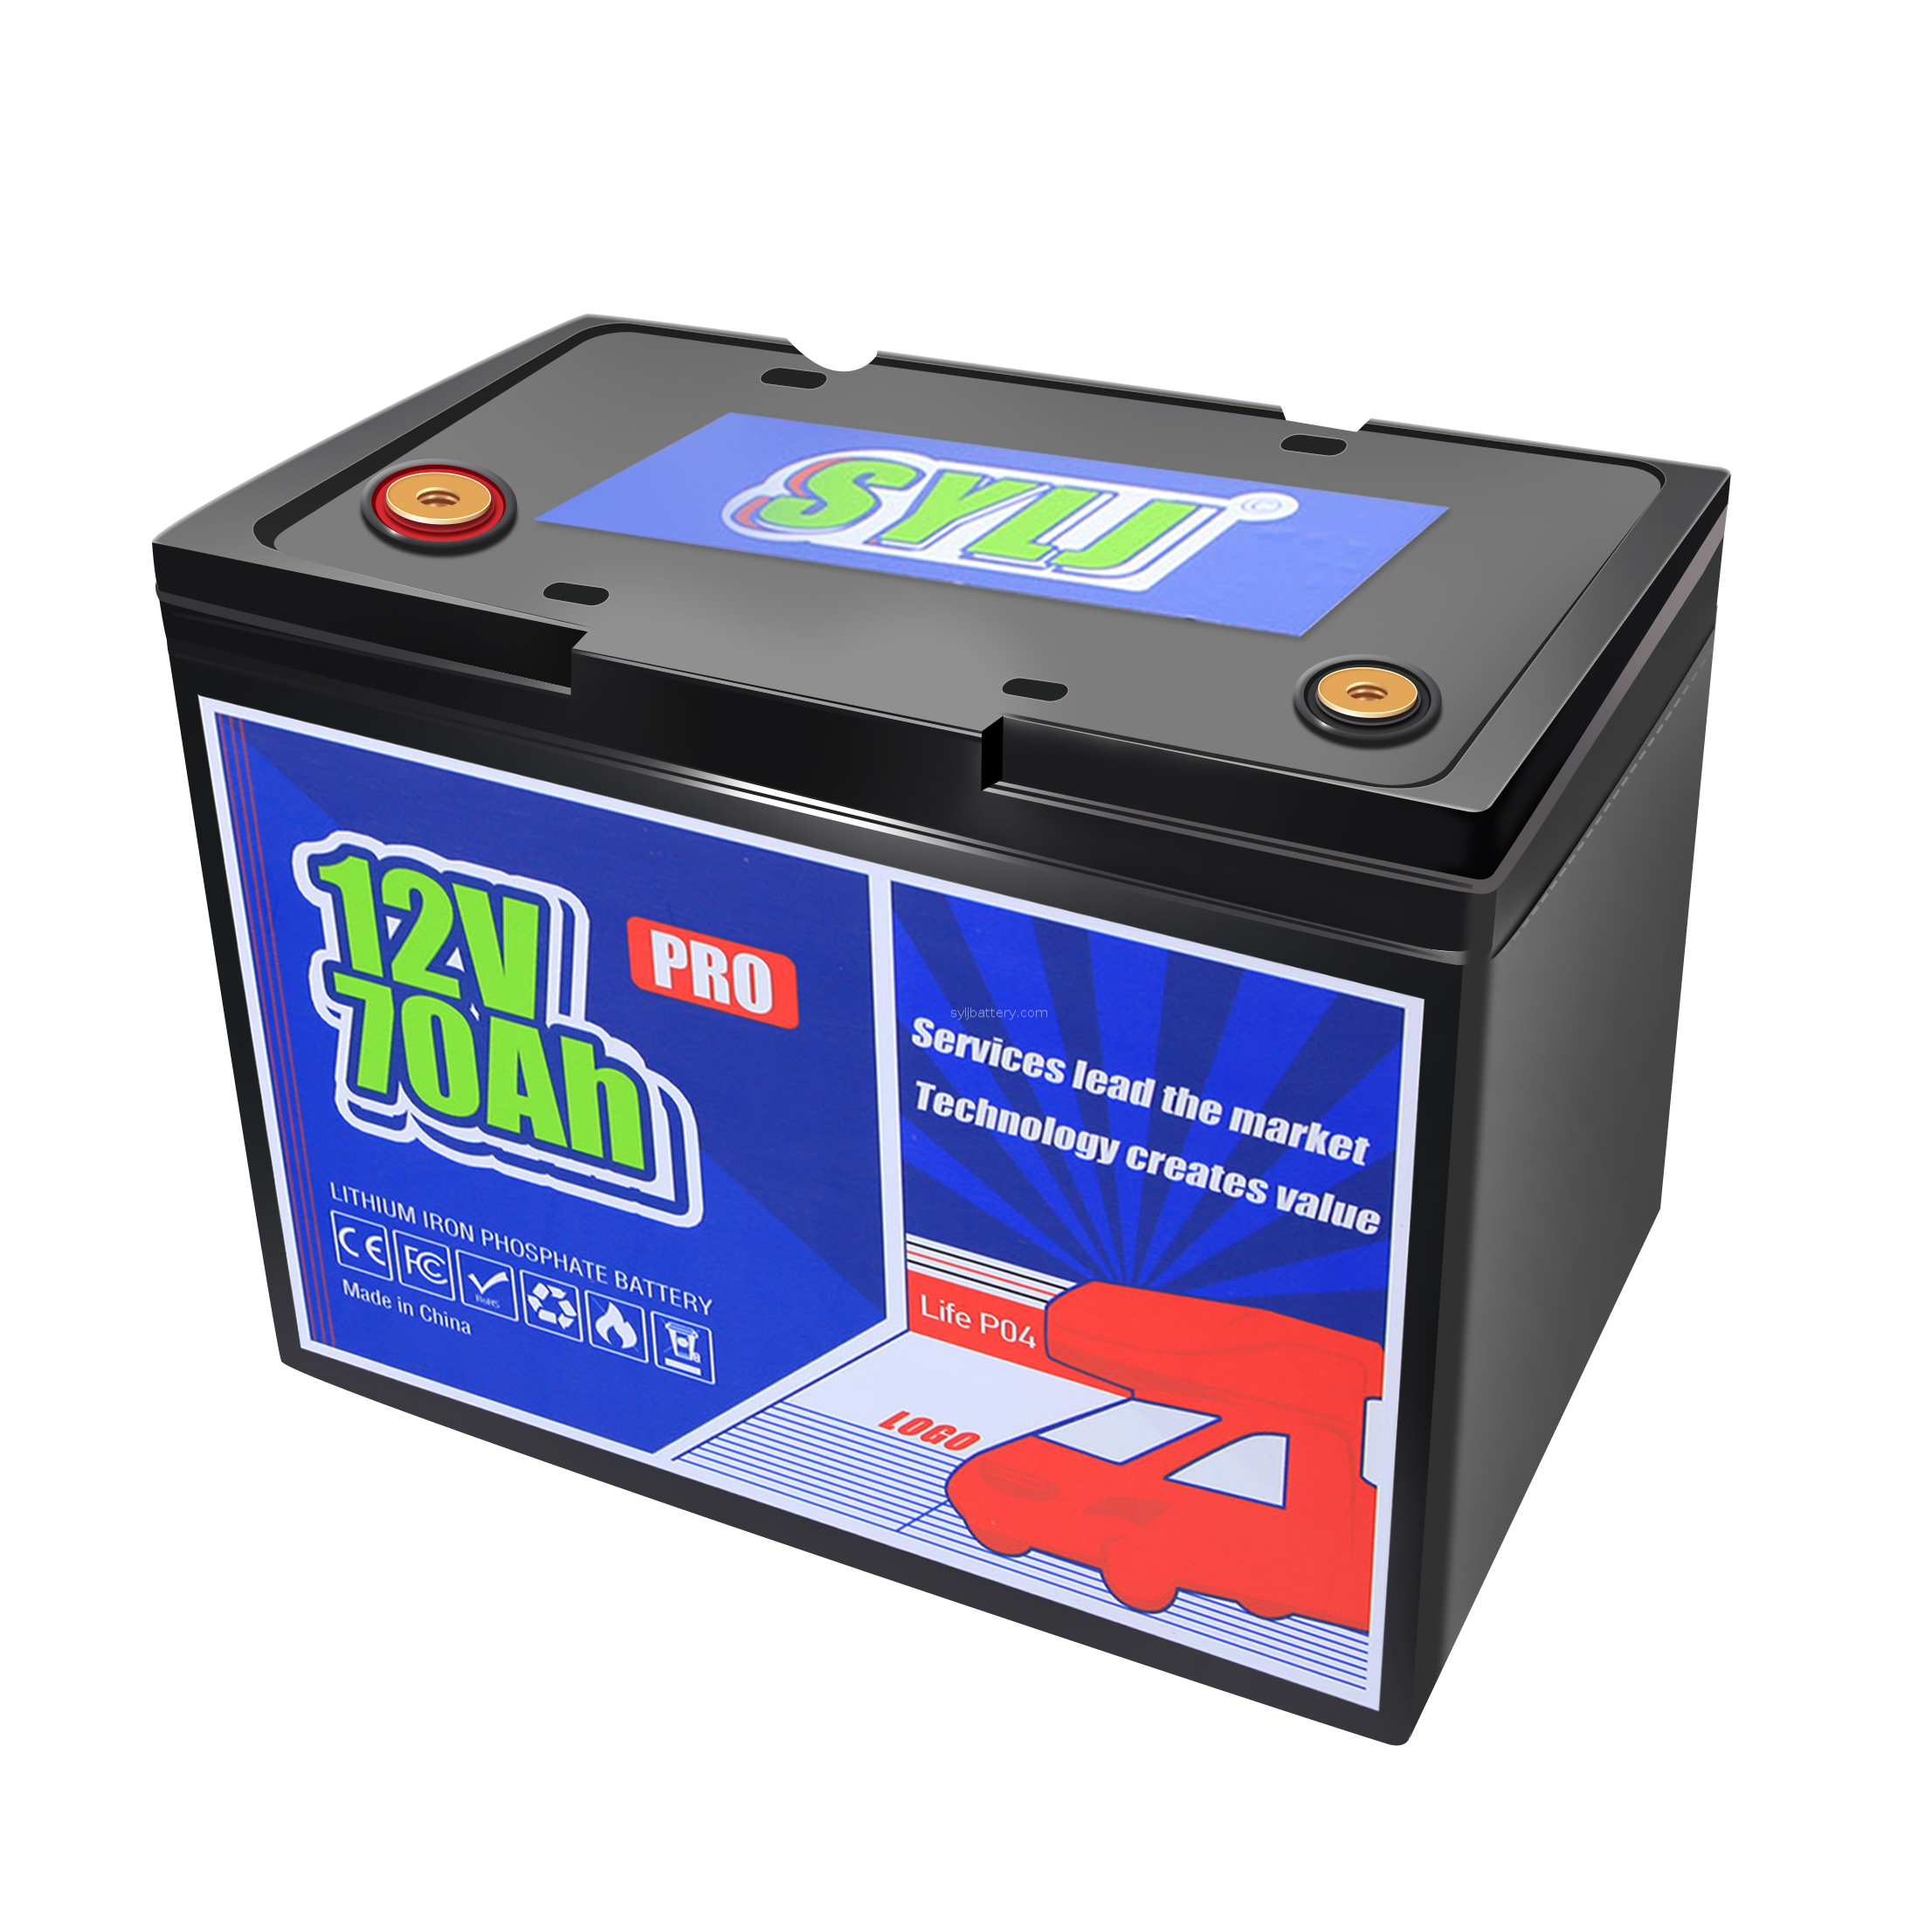 12V 70Ah LiFePO4 Battery with Self-Heating, Supports Low Temperature Charging(-4°F) Lithium Battery, Built-in 70A BMS, 4000+ Deep Cycles, Perfect for RV, Solar, Off-Grid in Cold Areas